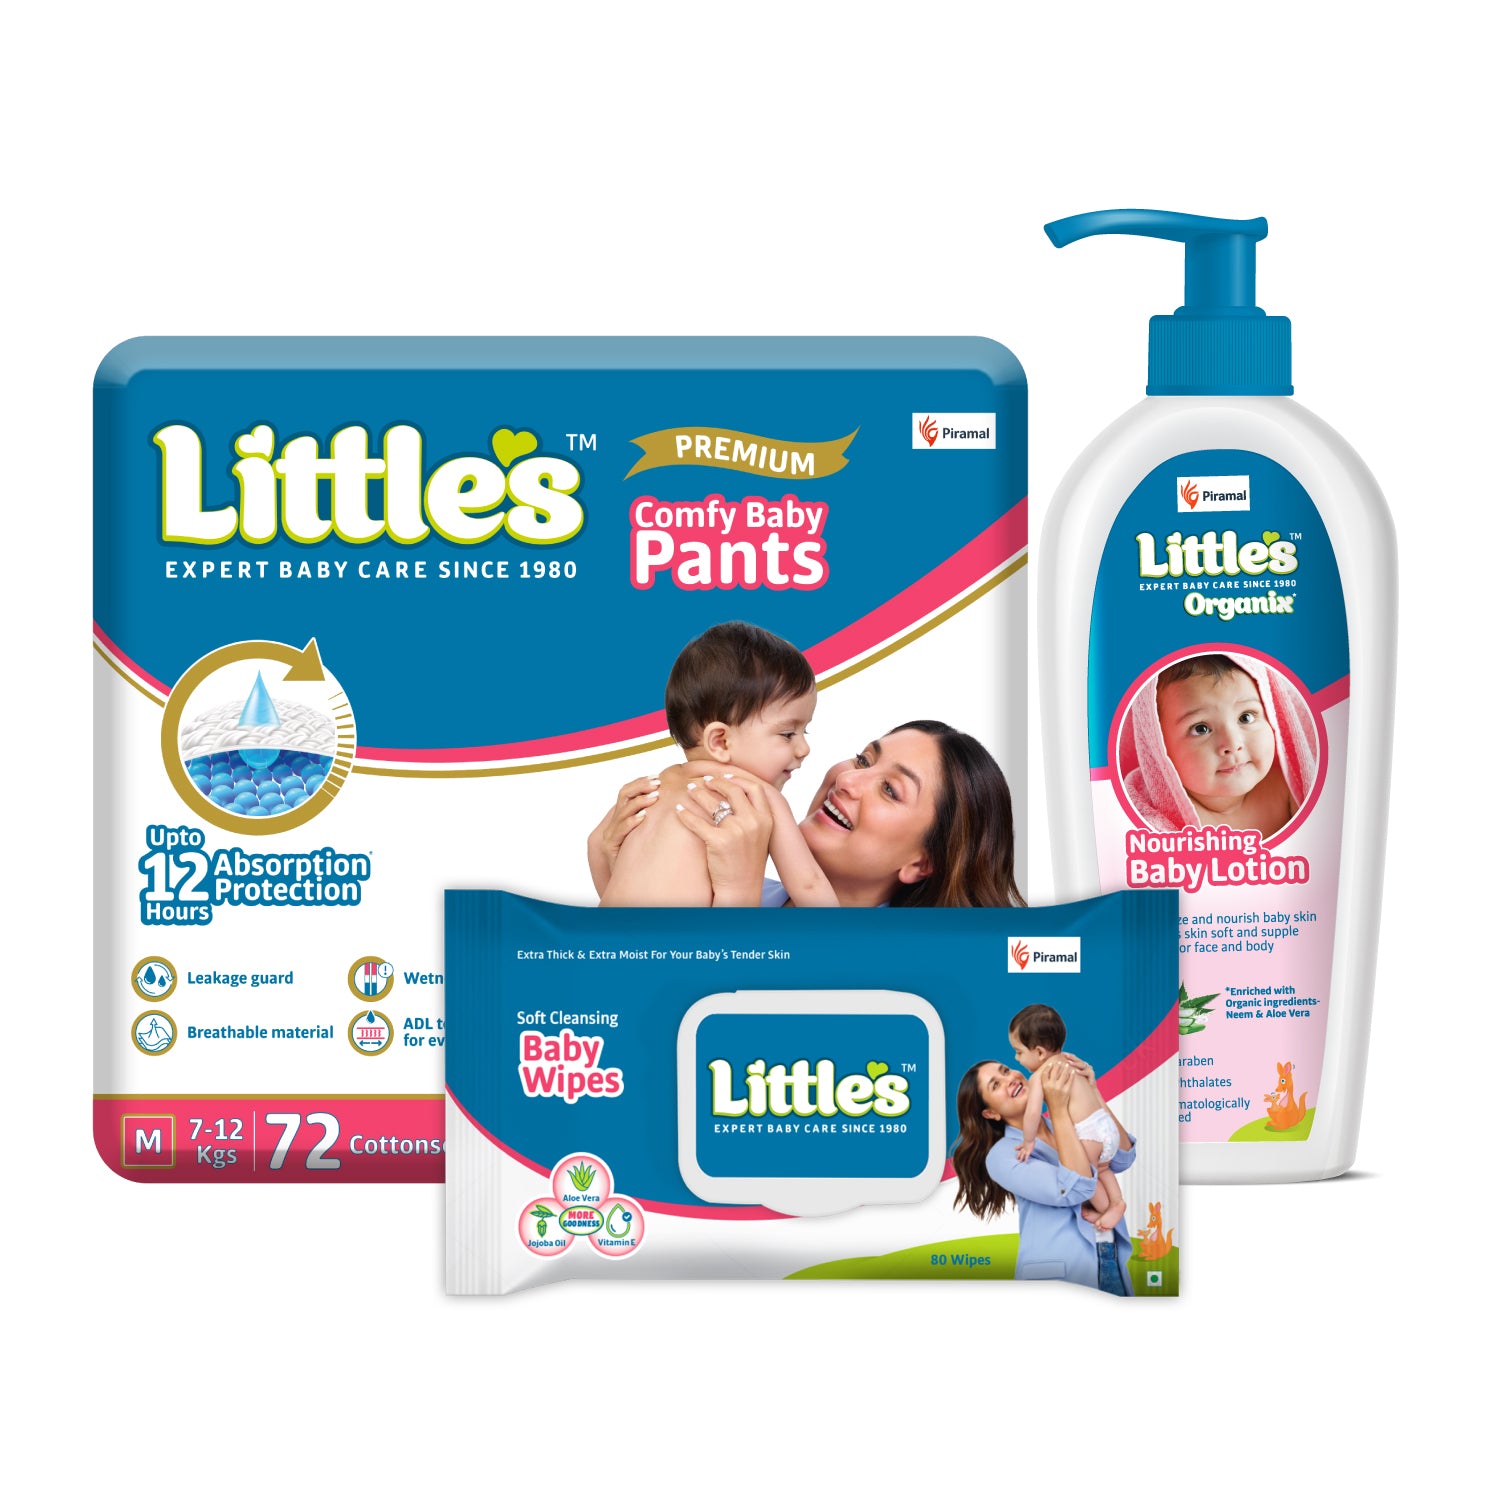 Little's Happy Baby Combo ( Little's Comfy Baby Pants | Medium I Superjumbo Pack of 1, Little's Soft Cleansing Baby Wipes Lid Pack of 1 | Contains Aloe Vera & Jojoba Oil -80 Wipes, Little's Organix Nourishing Baby Lotion (400 ml - Pump Pack)